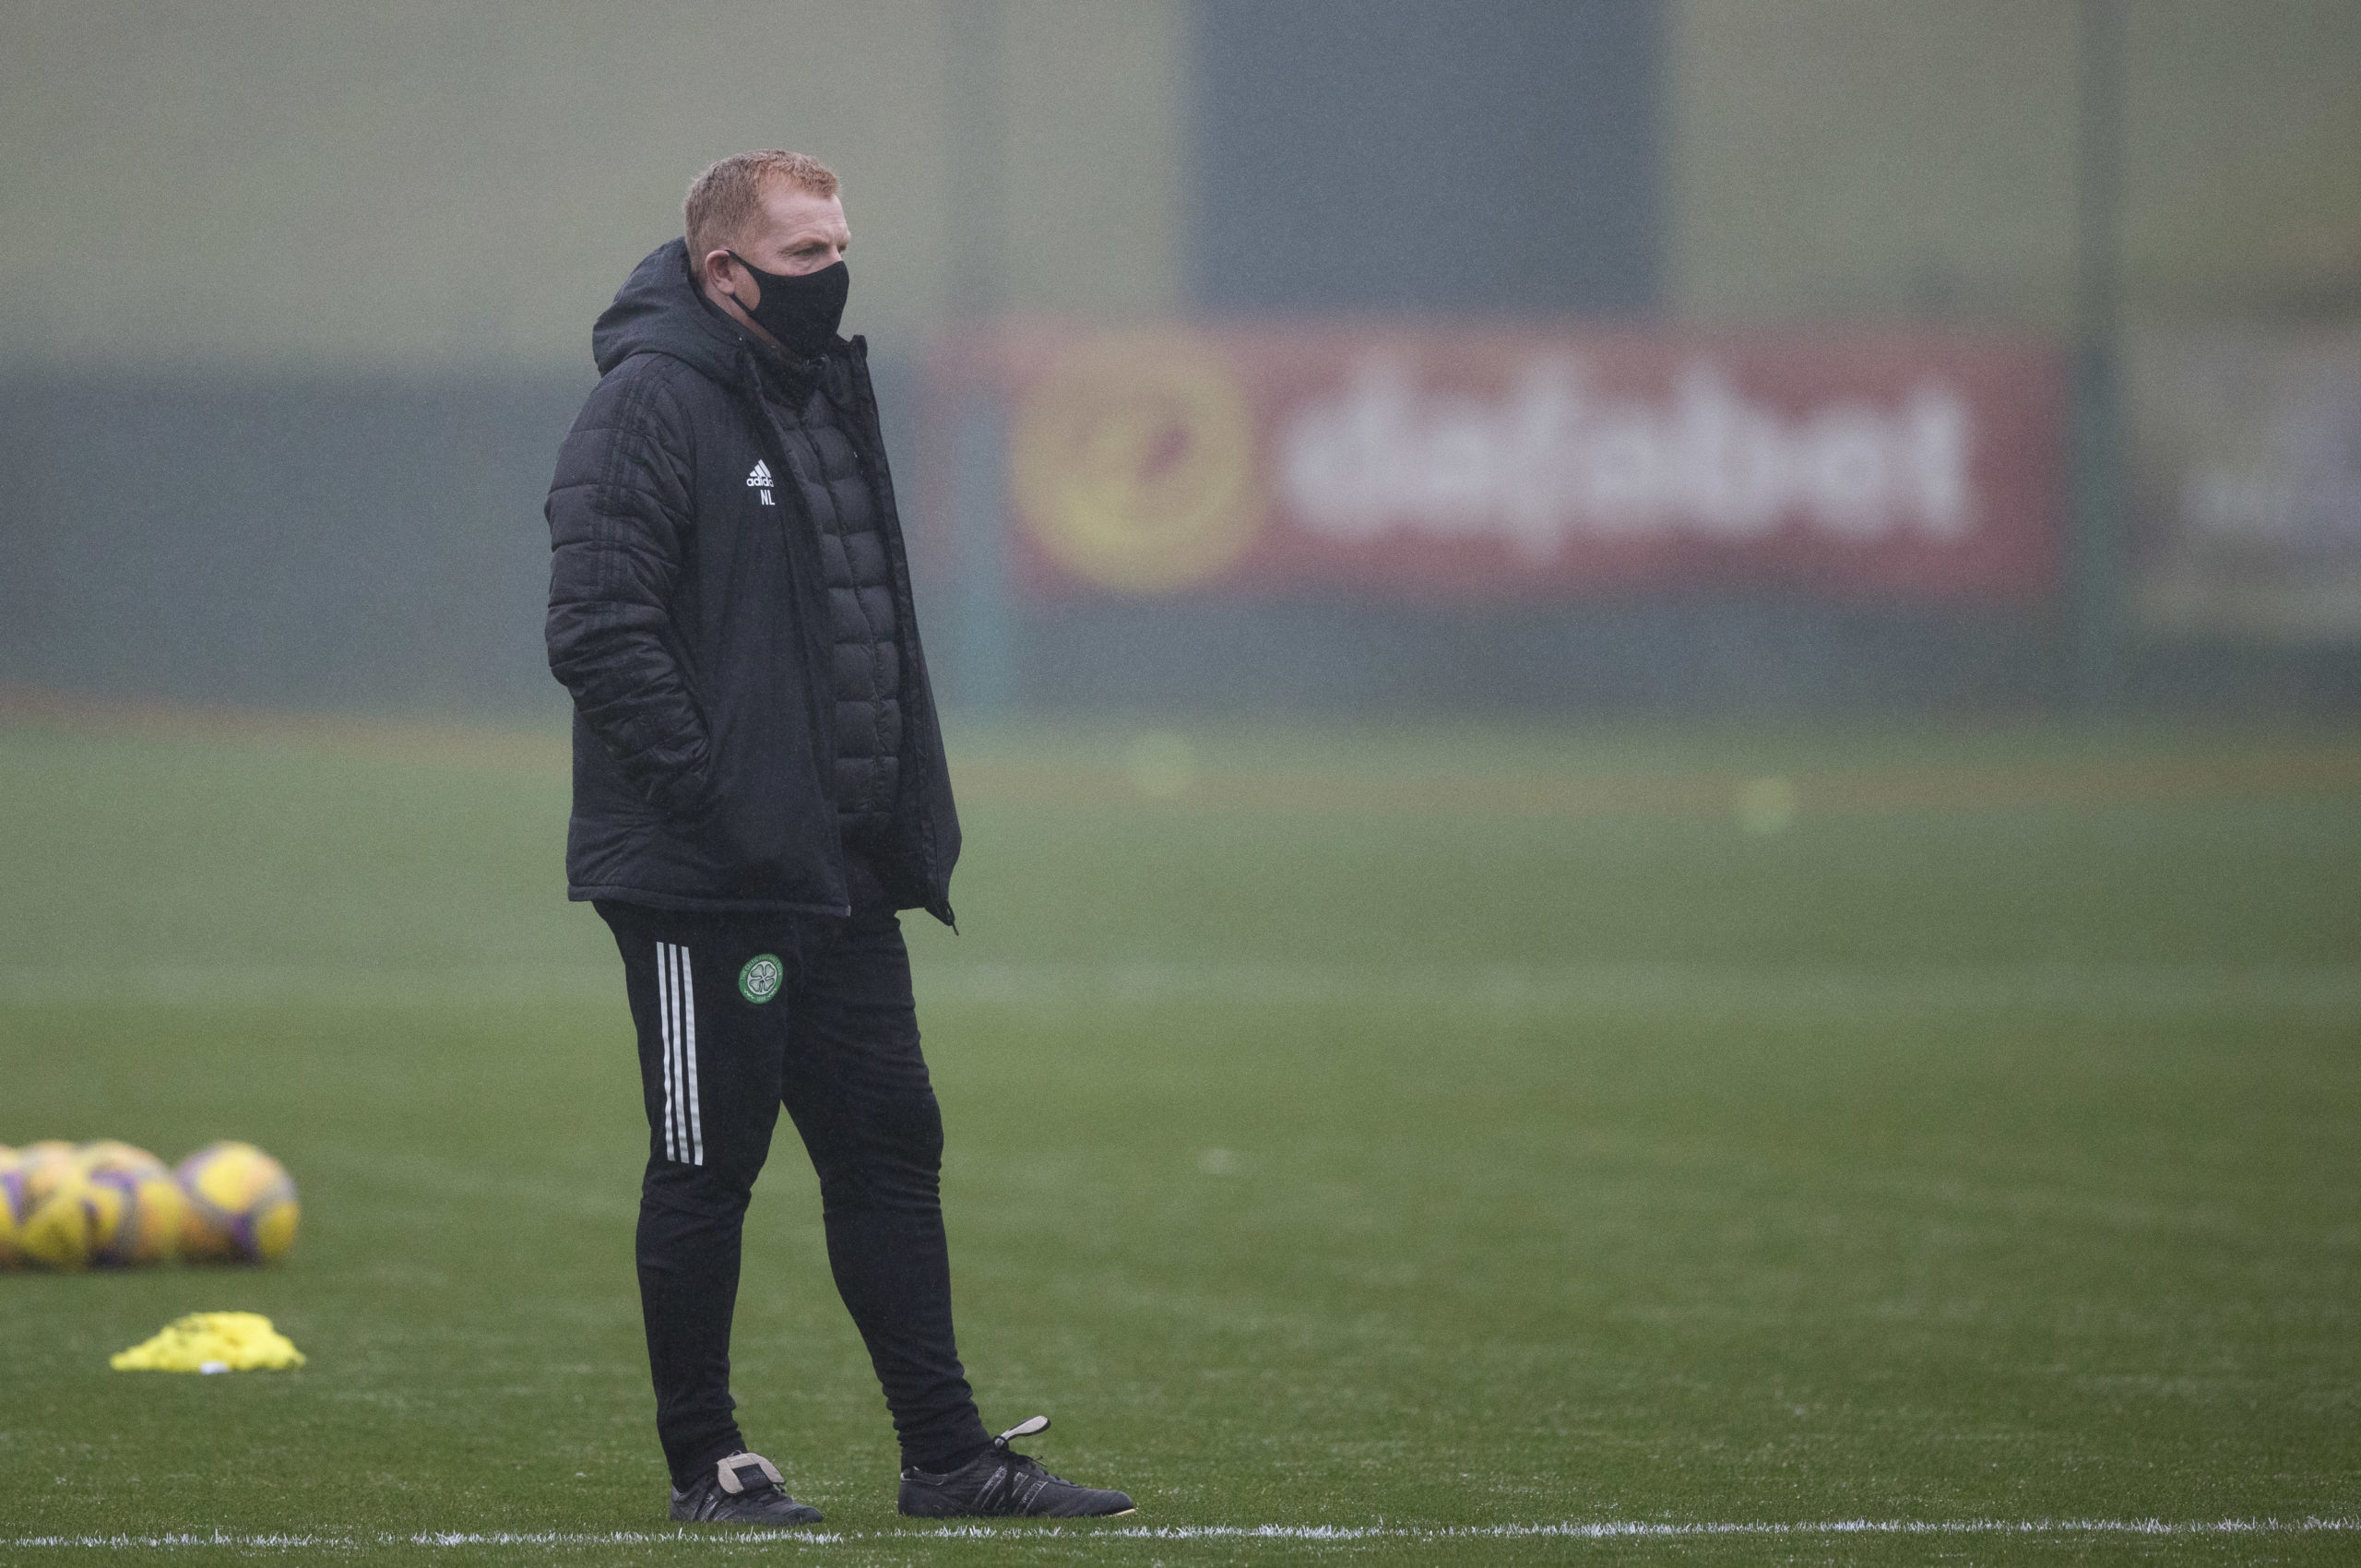 Fans are furious with today's update from Celtic Park and rightly so